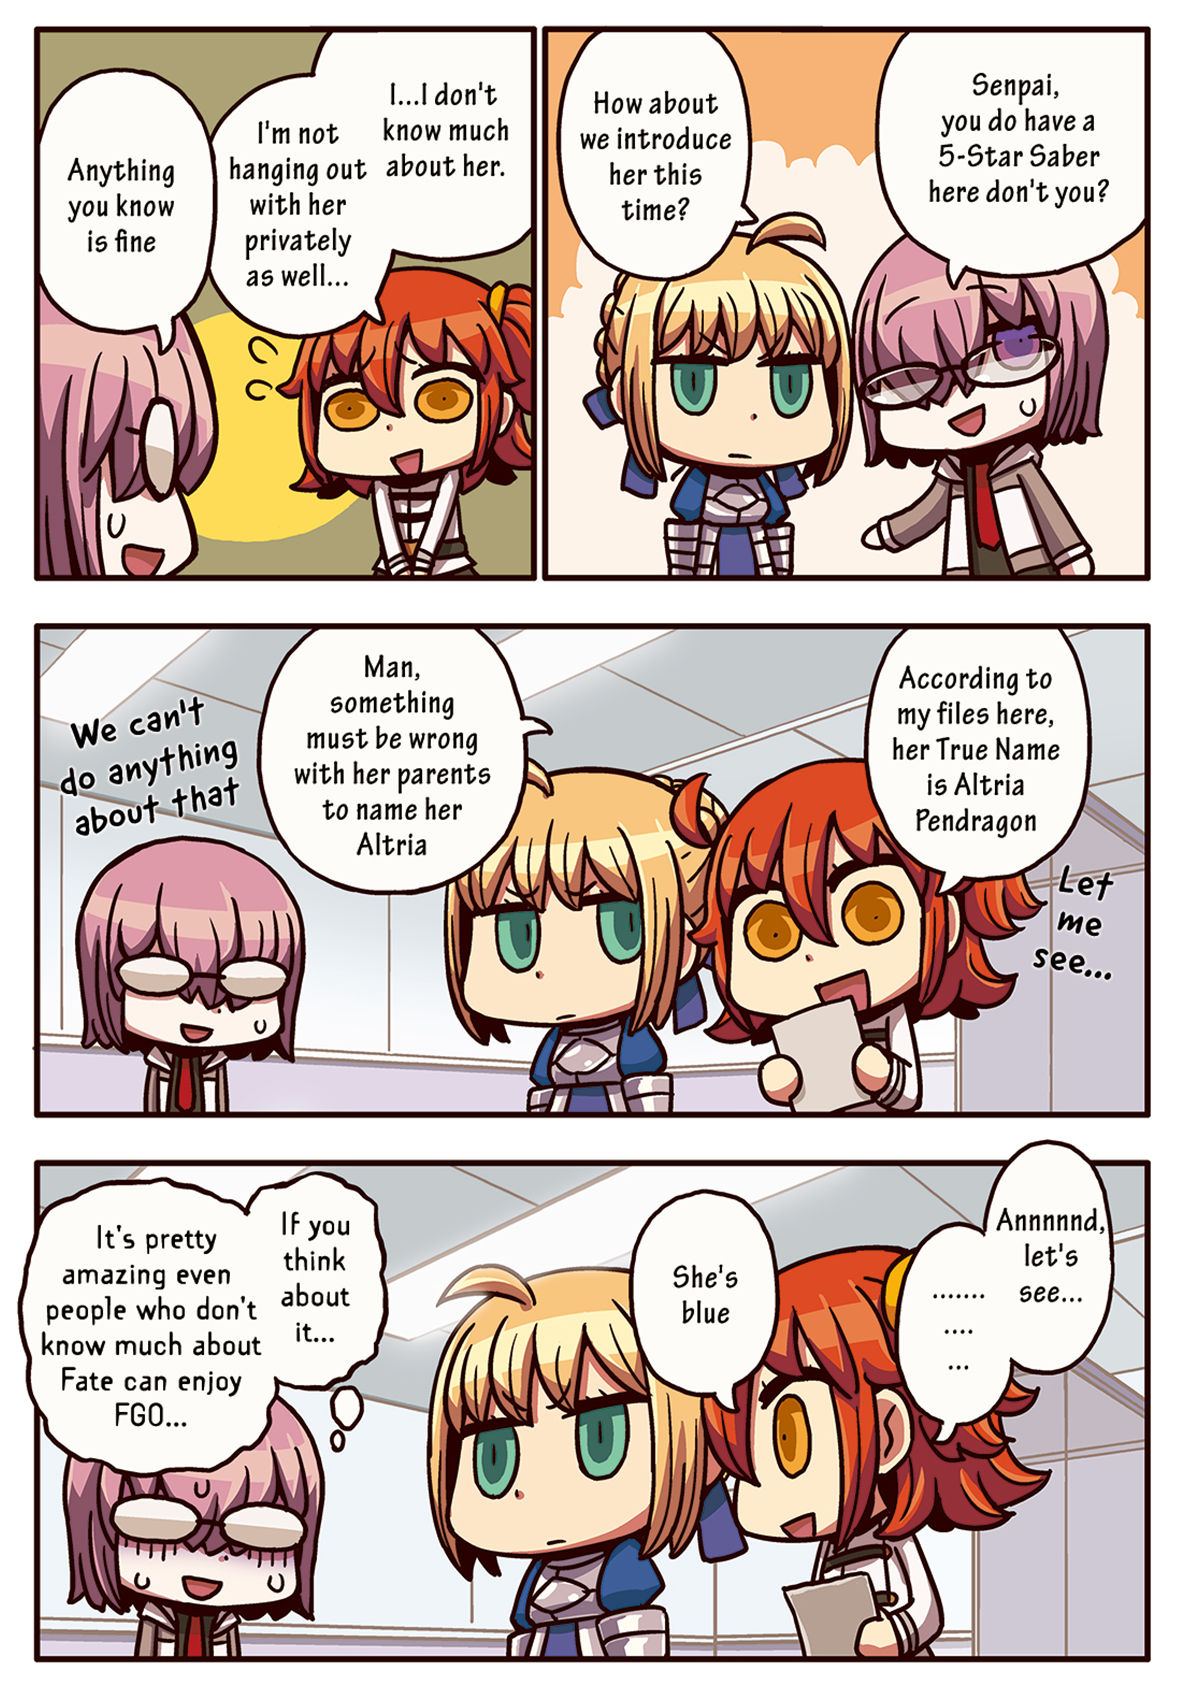 Episode 3 More Learning with Manga! Fate/Grand Order